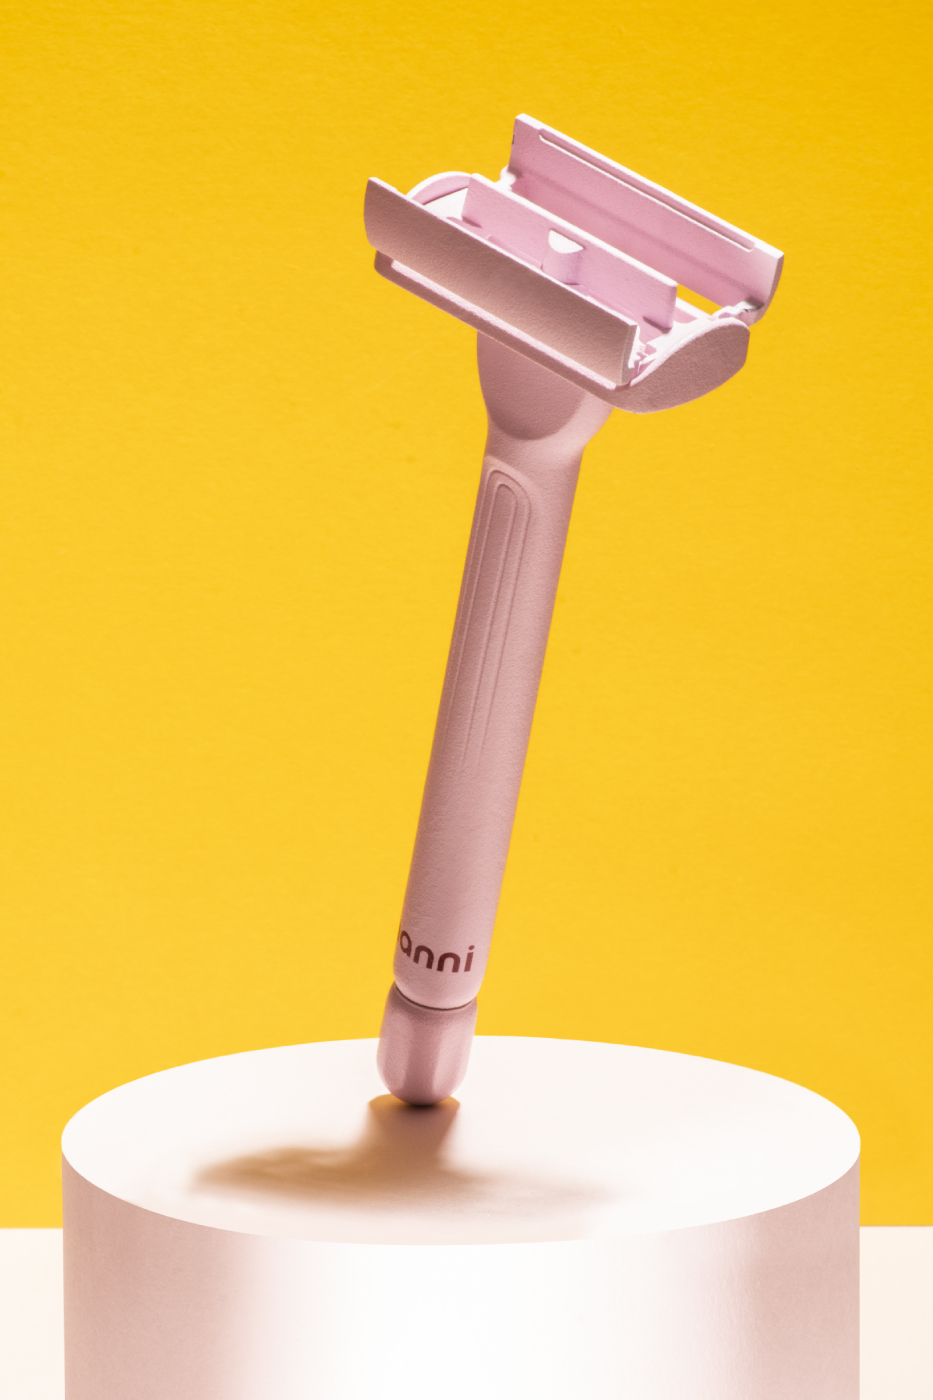 Hanni razor on display with bright yellow background shot by Katelin Kinney